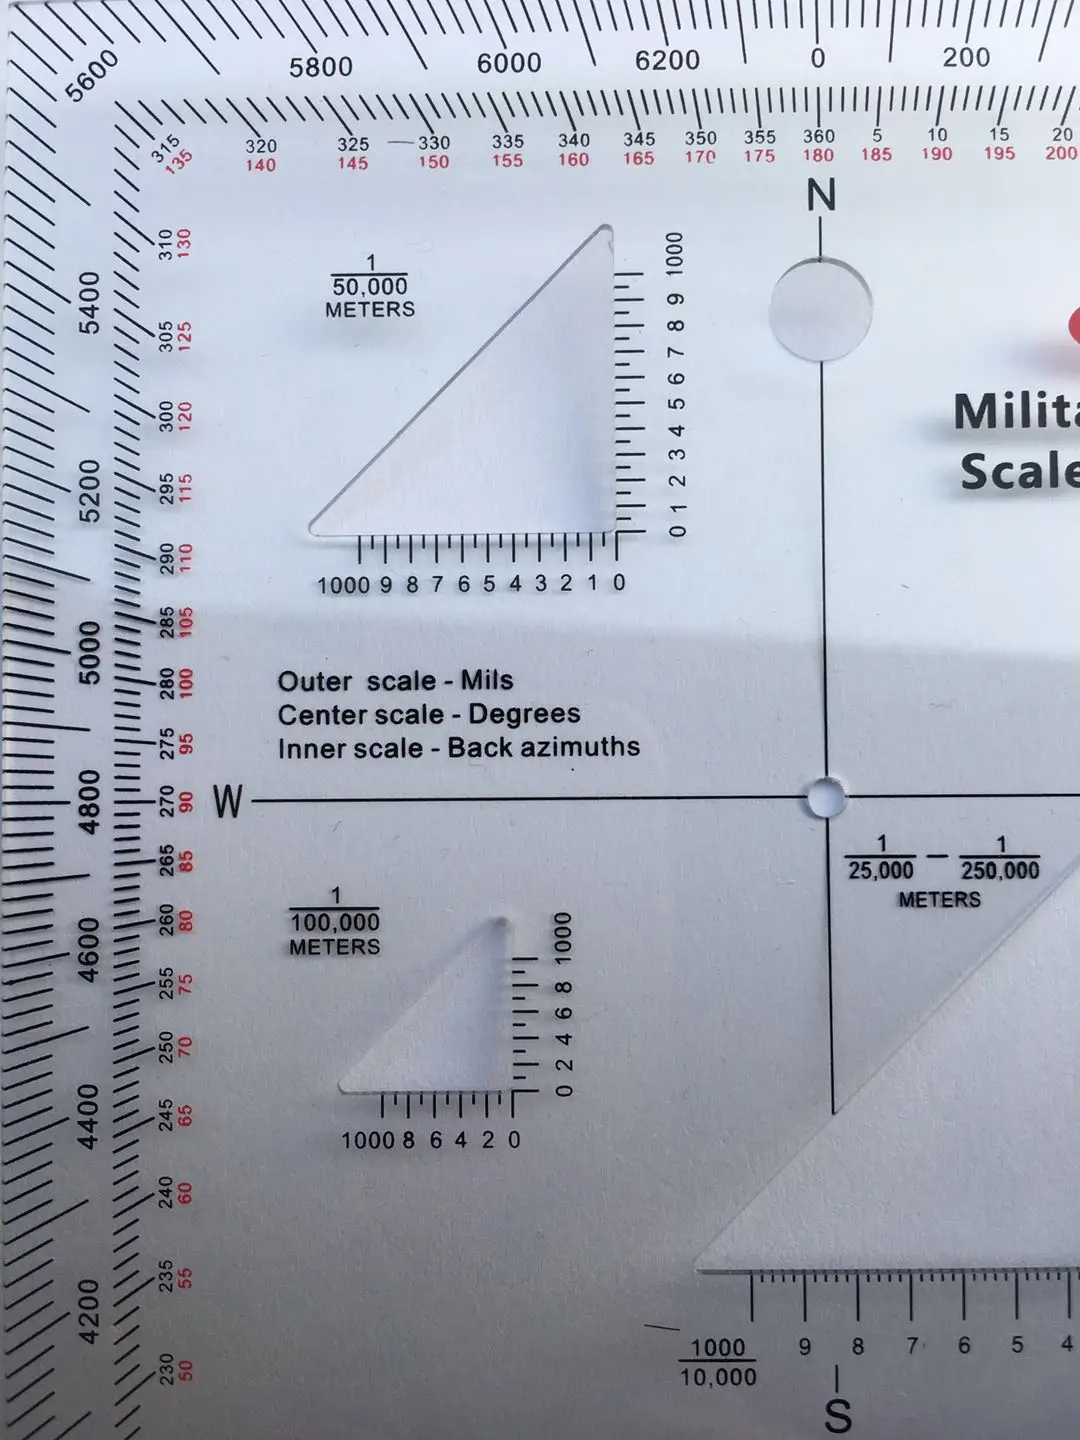 military coordinate scale and protractor sale